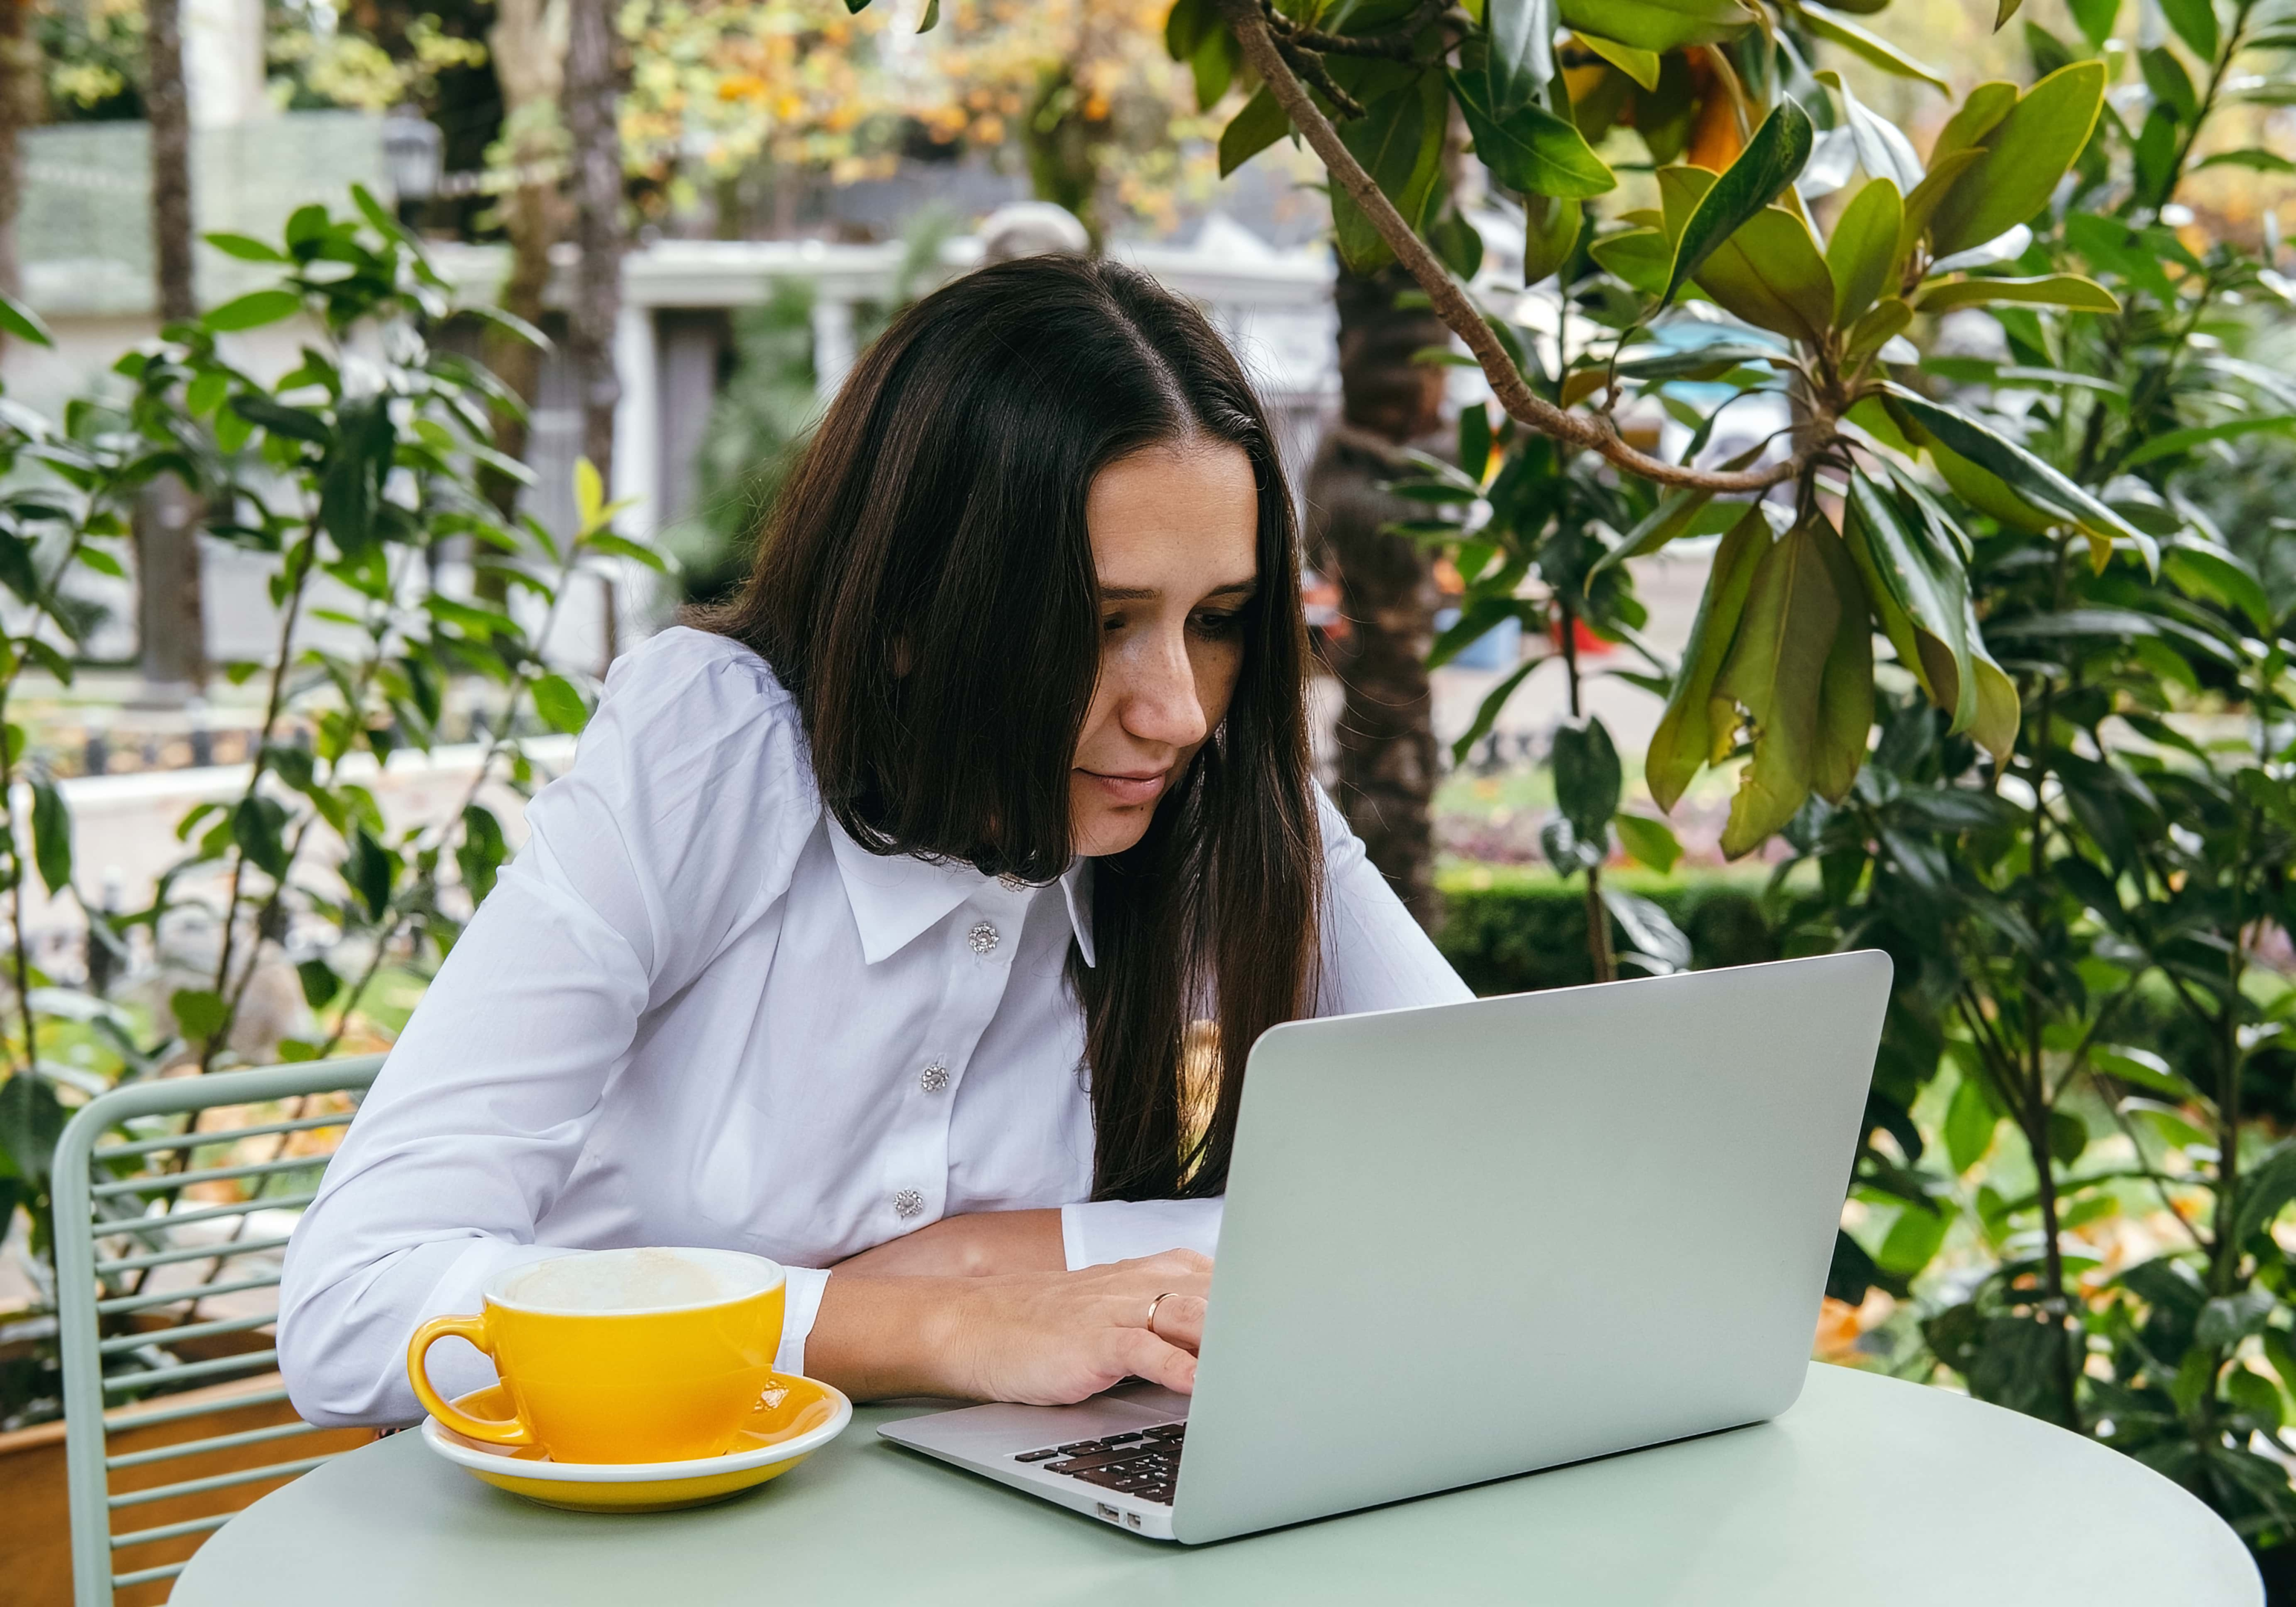 woman sitting with bad posture on laptop.  She has a yellow cup of coffee next to her.  There is a tree in the background. Strathfield chiro or Five Dock chiro treatment to relieve pain.